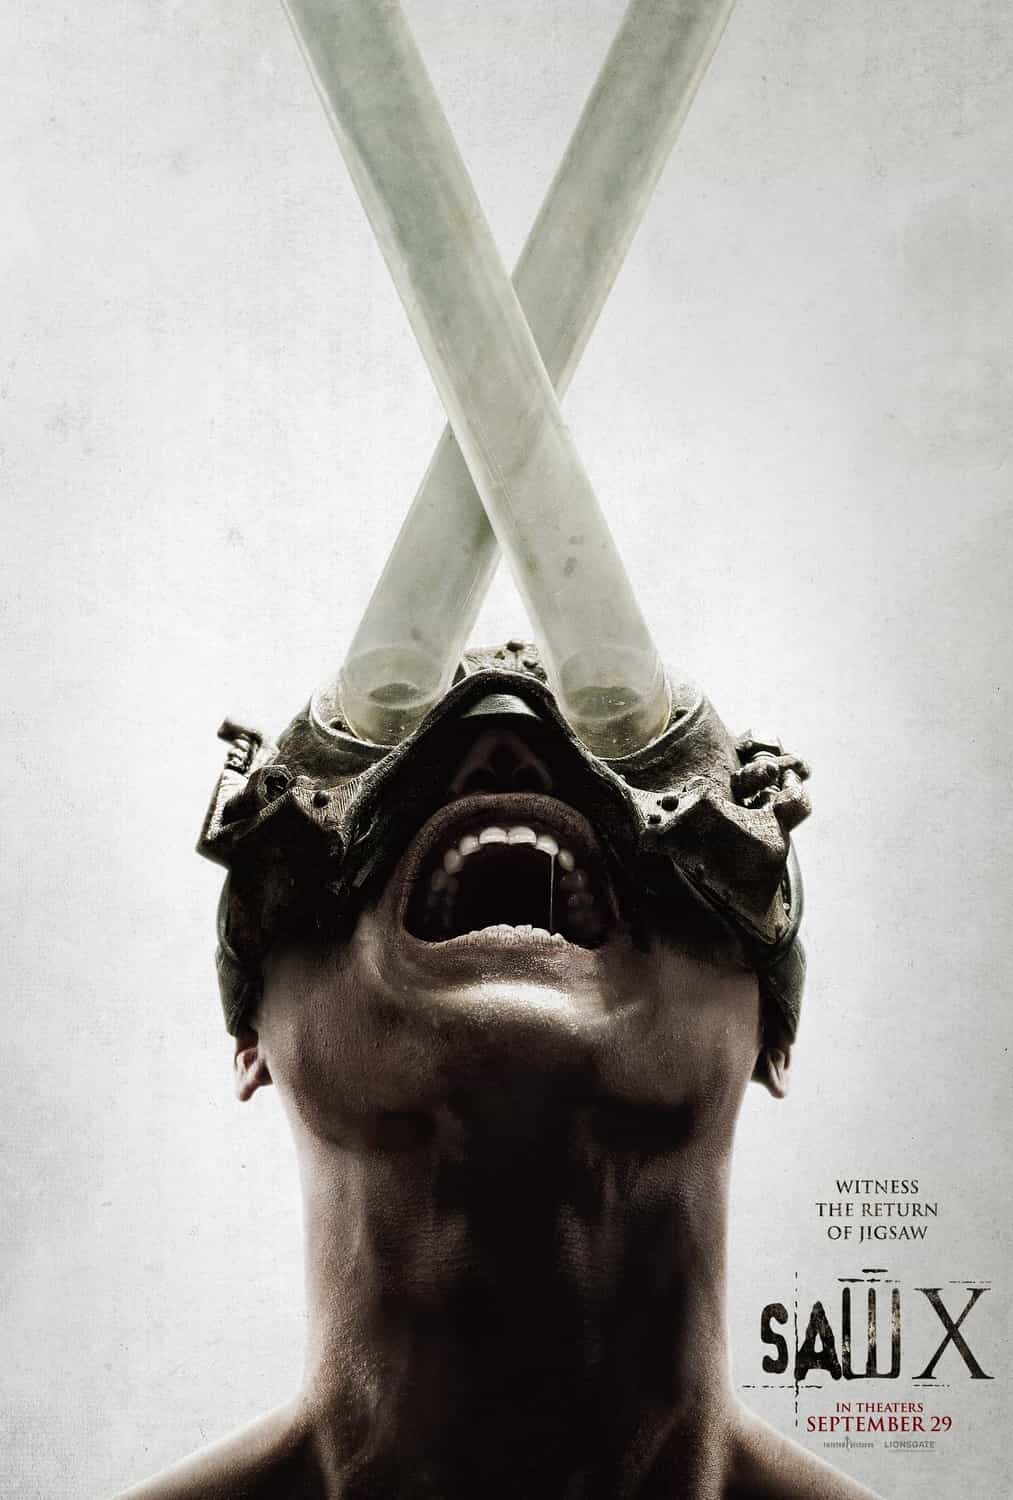 Saw X has been given an 18 age rating in the UK for strong bloody violence, gore